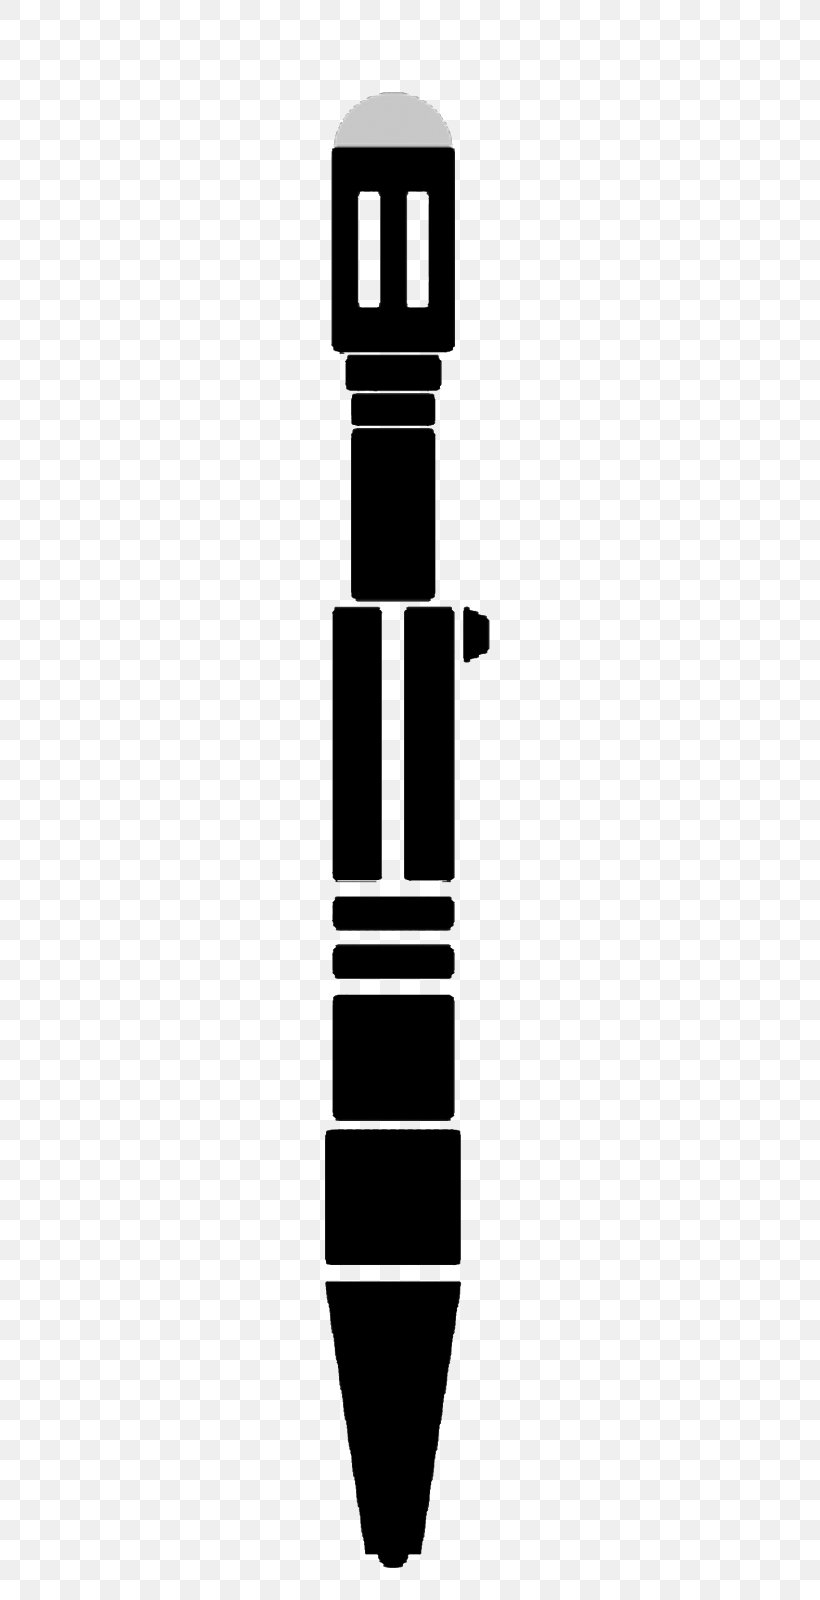 The Doctor War Doctor Clip Art Sonic Screwdriver Tenth Doctor, PNG, 169x1600px, Doctor, Black, Black And White, Doctor Who, Doctor Who 2013 Specials Download Free